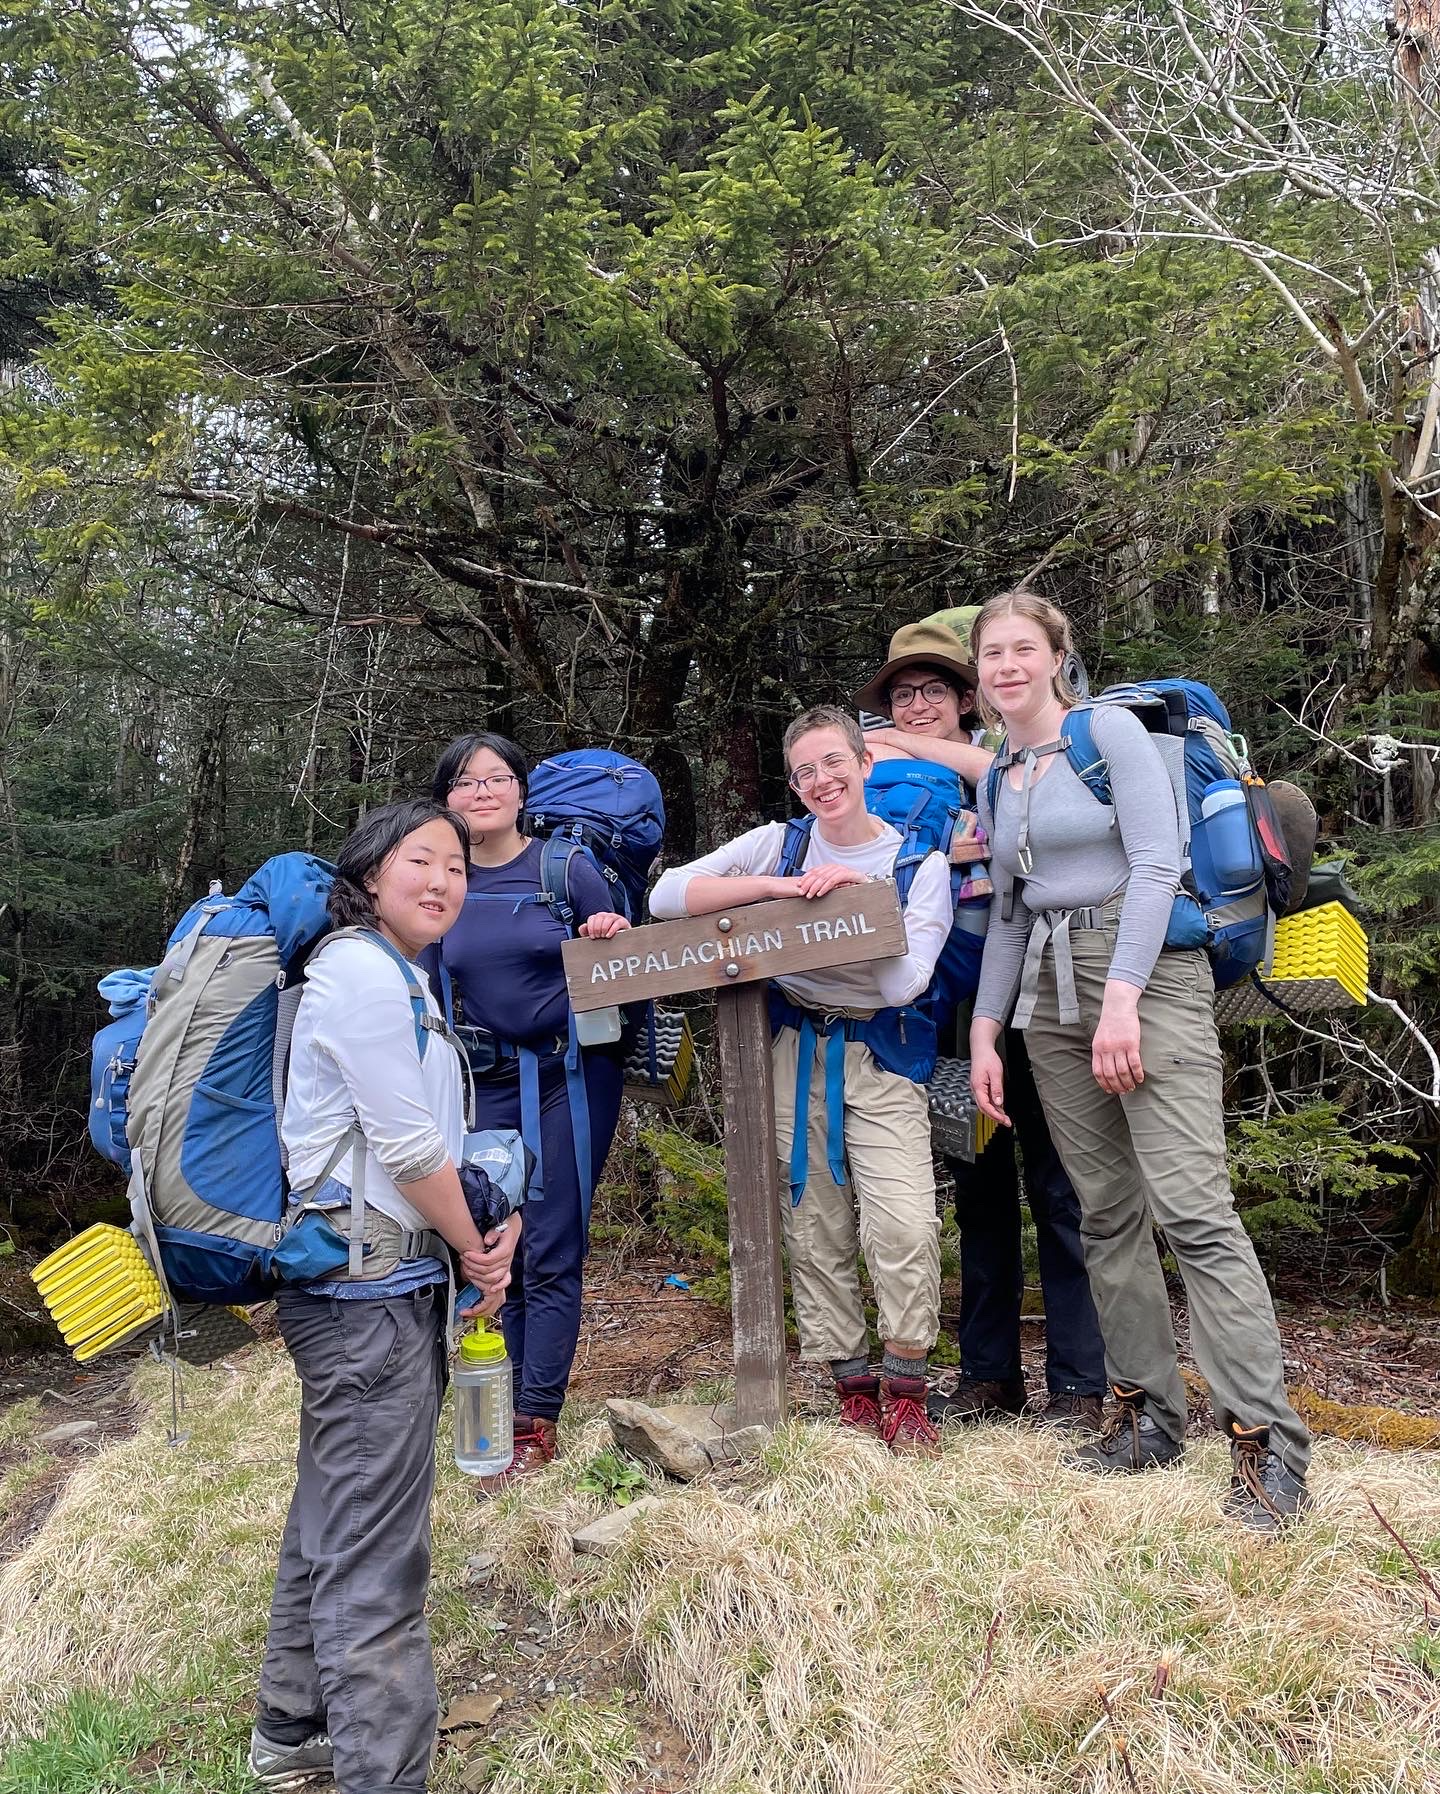 five smiling people stand around a sign that says "Appalachian Trail"